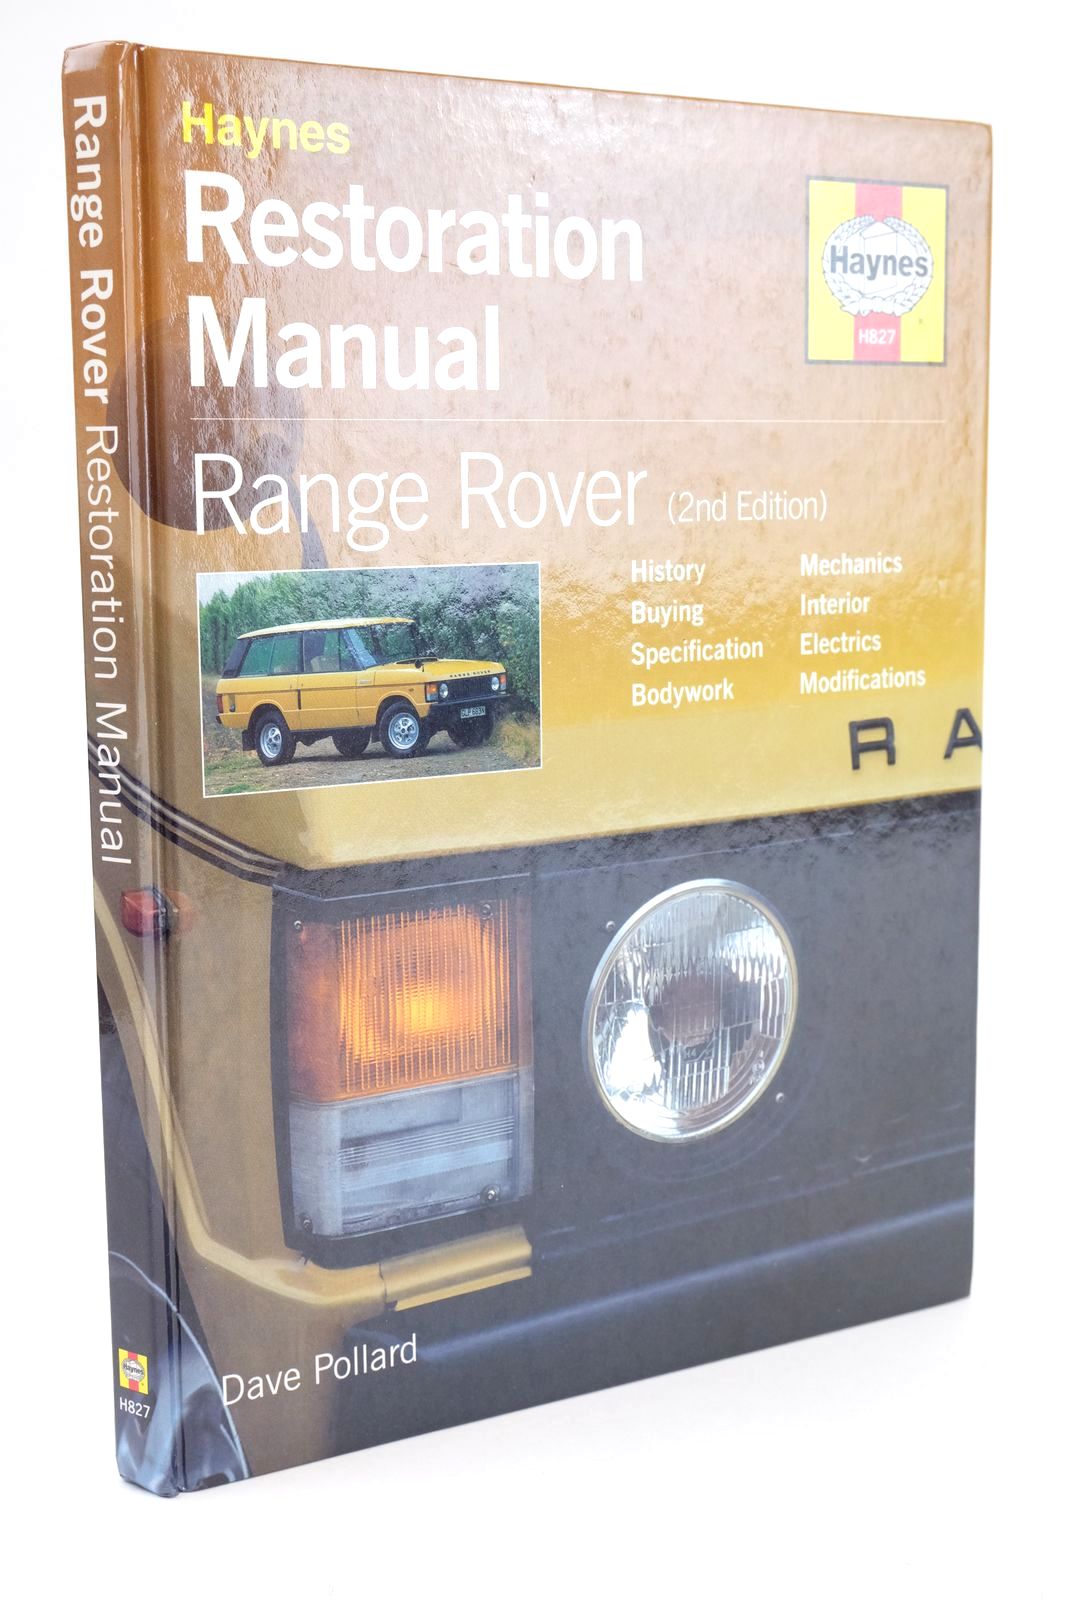 Photo of HAYNES RESTORATION MANUAL: RANGE ROVER (2ND EDITION) written by Pollard, Dave published by Haynes Publishing (STOCK CODE: 1324915)  for sale by Stella & Rose's Books